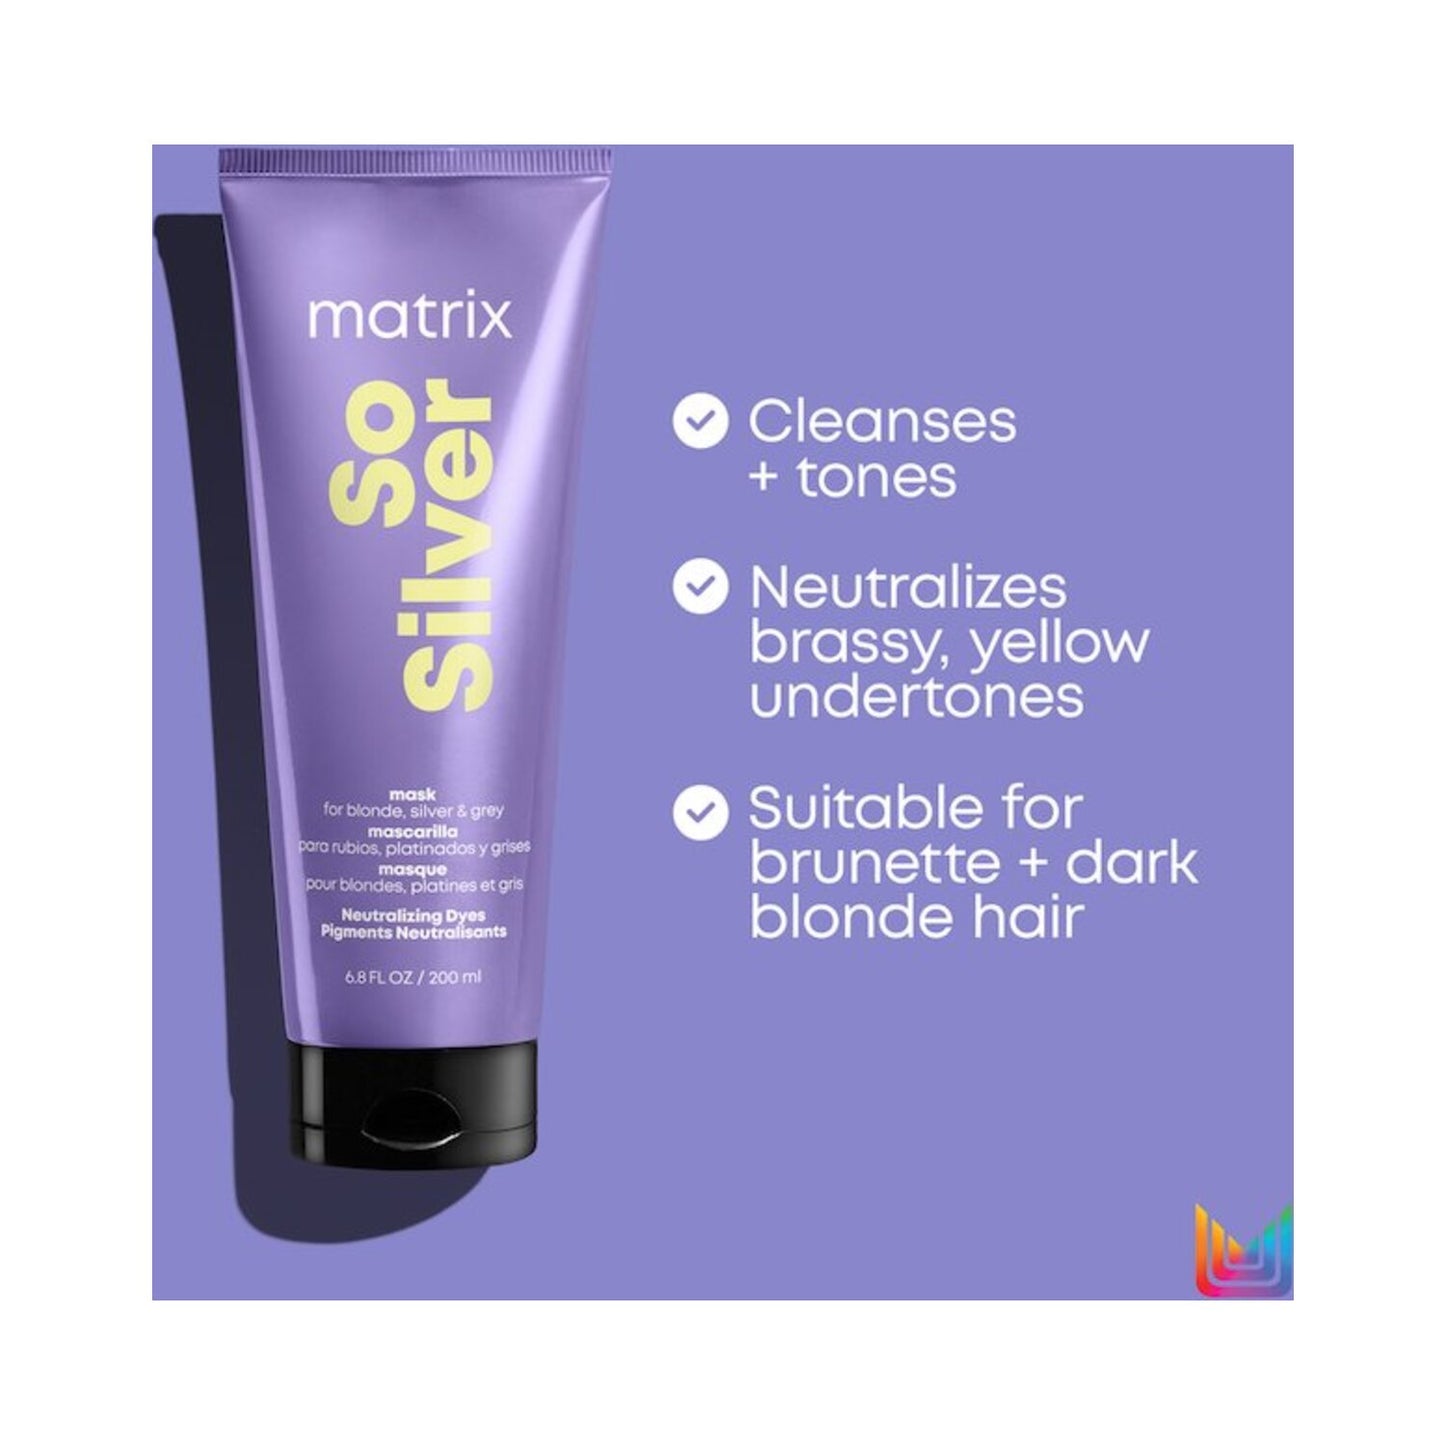 Matrix So Silver Triple Power Toning Hair Mask for Blonde and Silver Hair